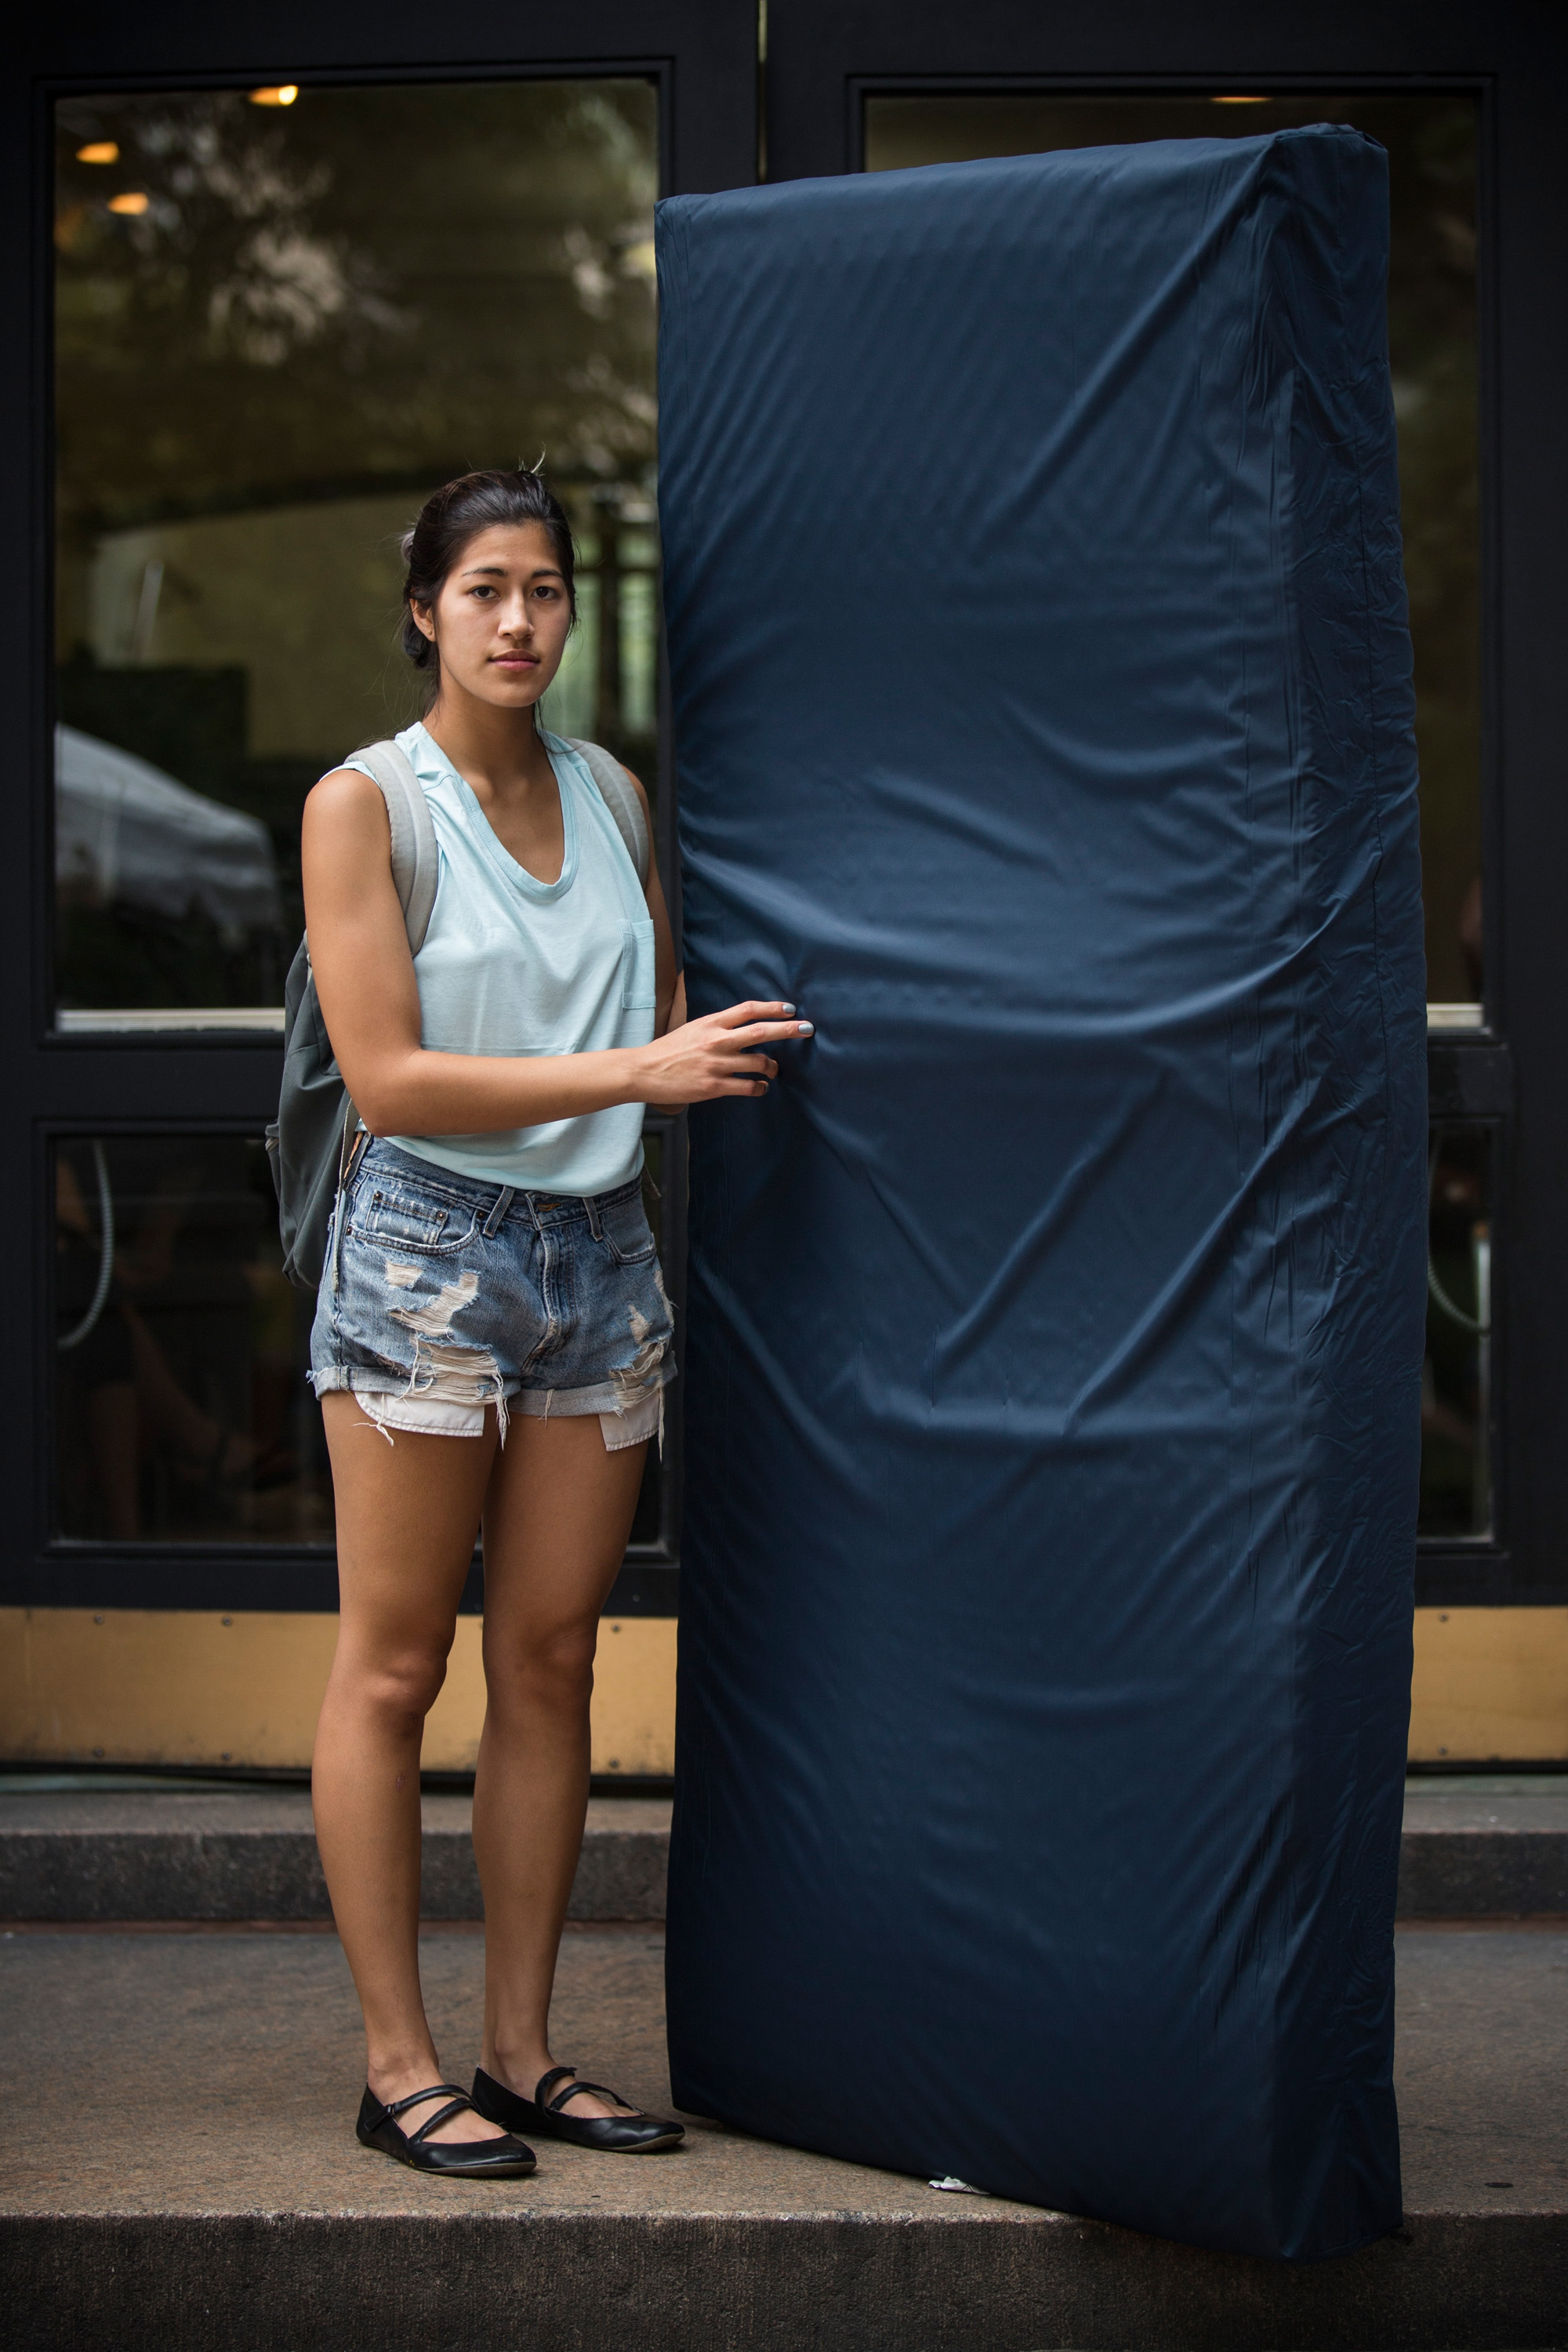 Emma Sulkowicz, a senior visual arts student at Columbia University, poses with a mattress, which she says she will carry every where she goes in protest of the university's lack of action after she reported being raped during her sophomore year, on September 5, 2014 in New York City. (Andrew Burton--Getty Images) (Andrew Burton&mdash;Getty Images)